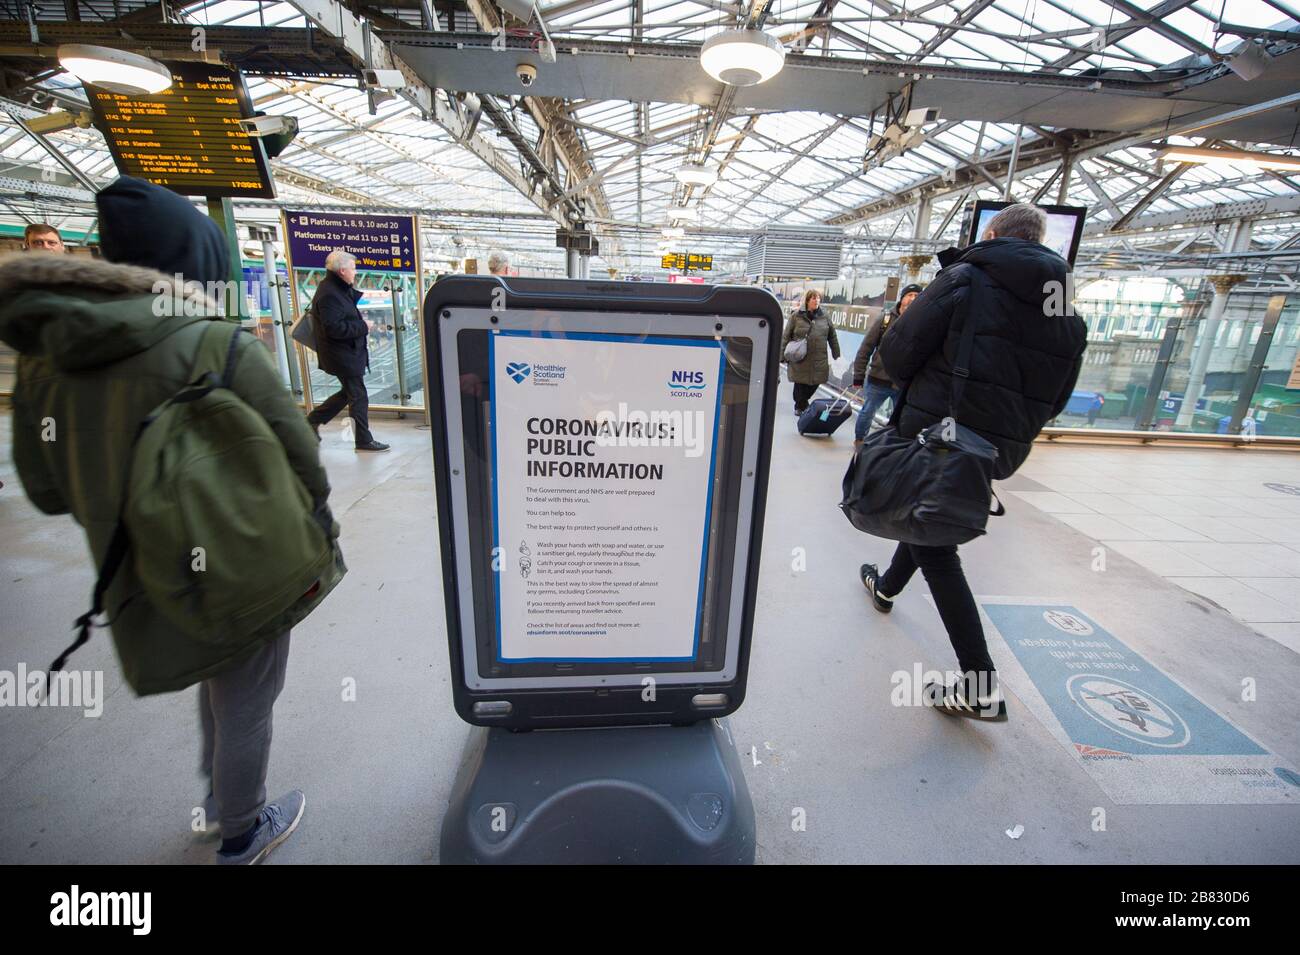 Edinburgh, UK. 19th Mar, 2020. Pictured: Public information sign in Waverley Station. Waverley Station during rush hour during the Coronavirus Pandemic. What would normally be hustle and bustle packed with commuters trying to get home, a more or less empty concourse. Credit: Colin Fisher/Alamy Live News Stock Photo